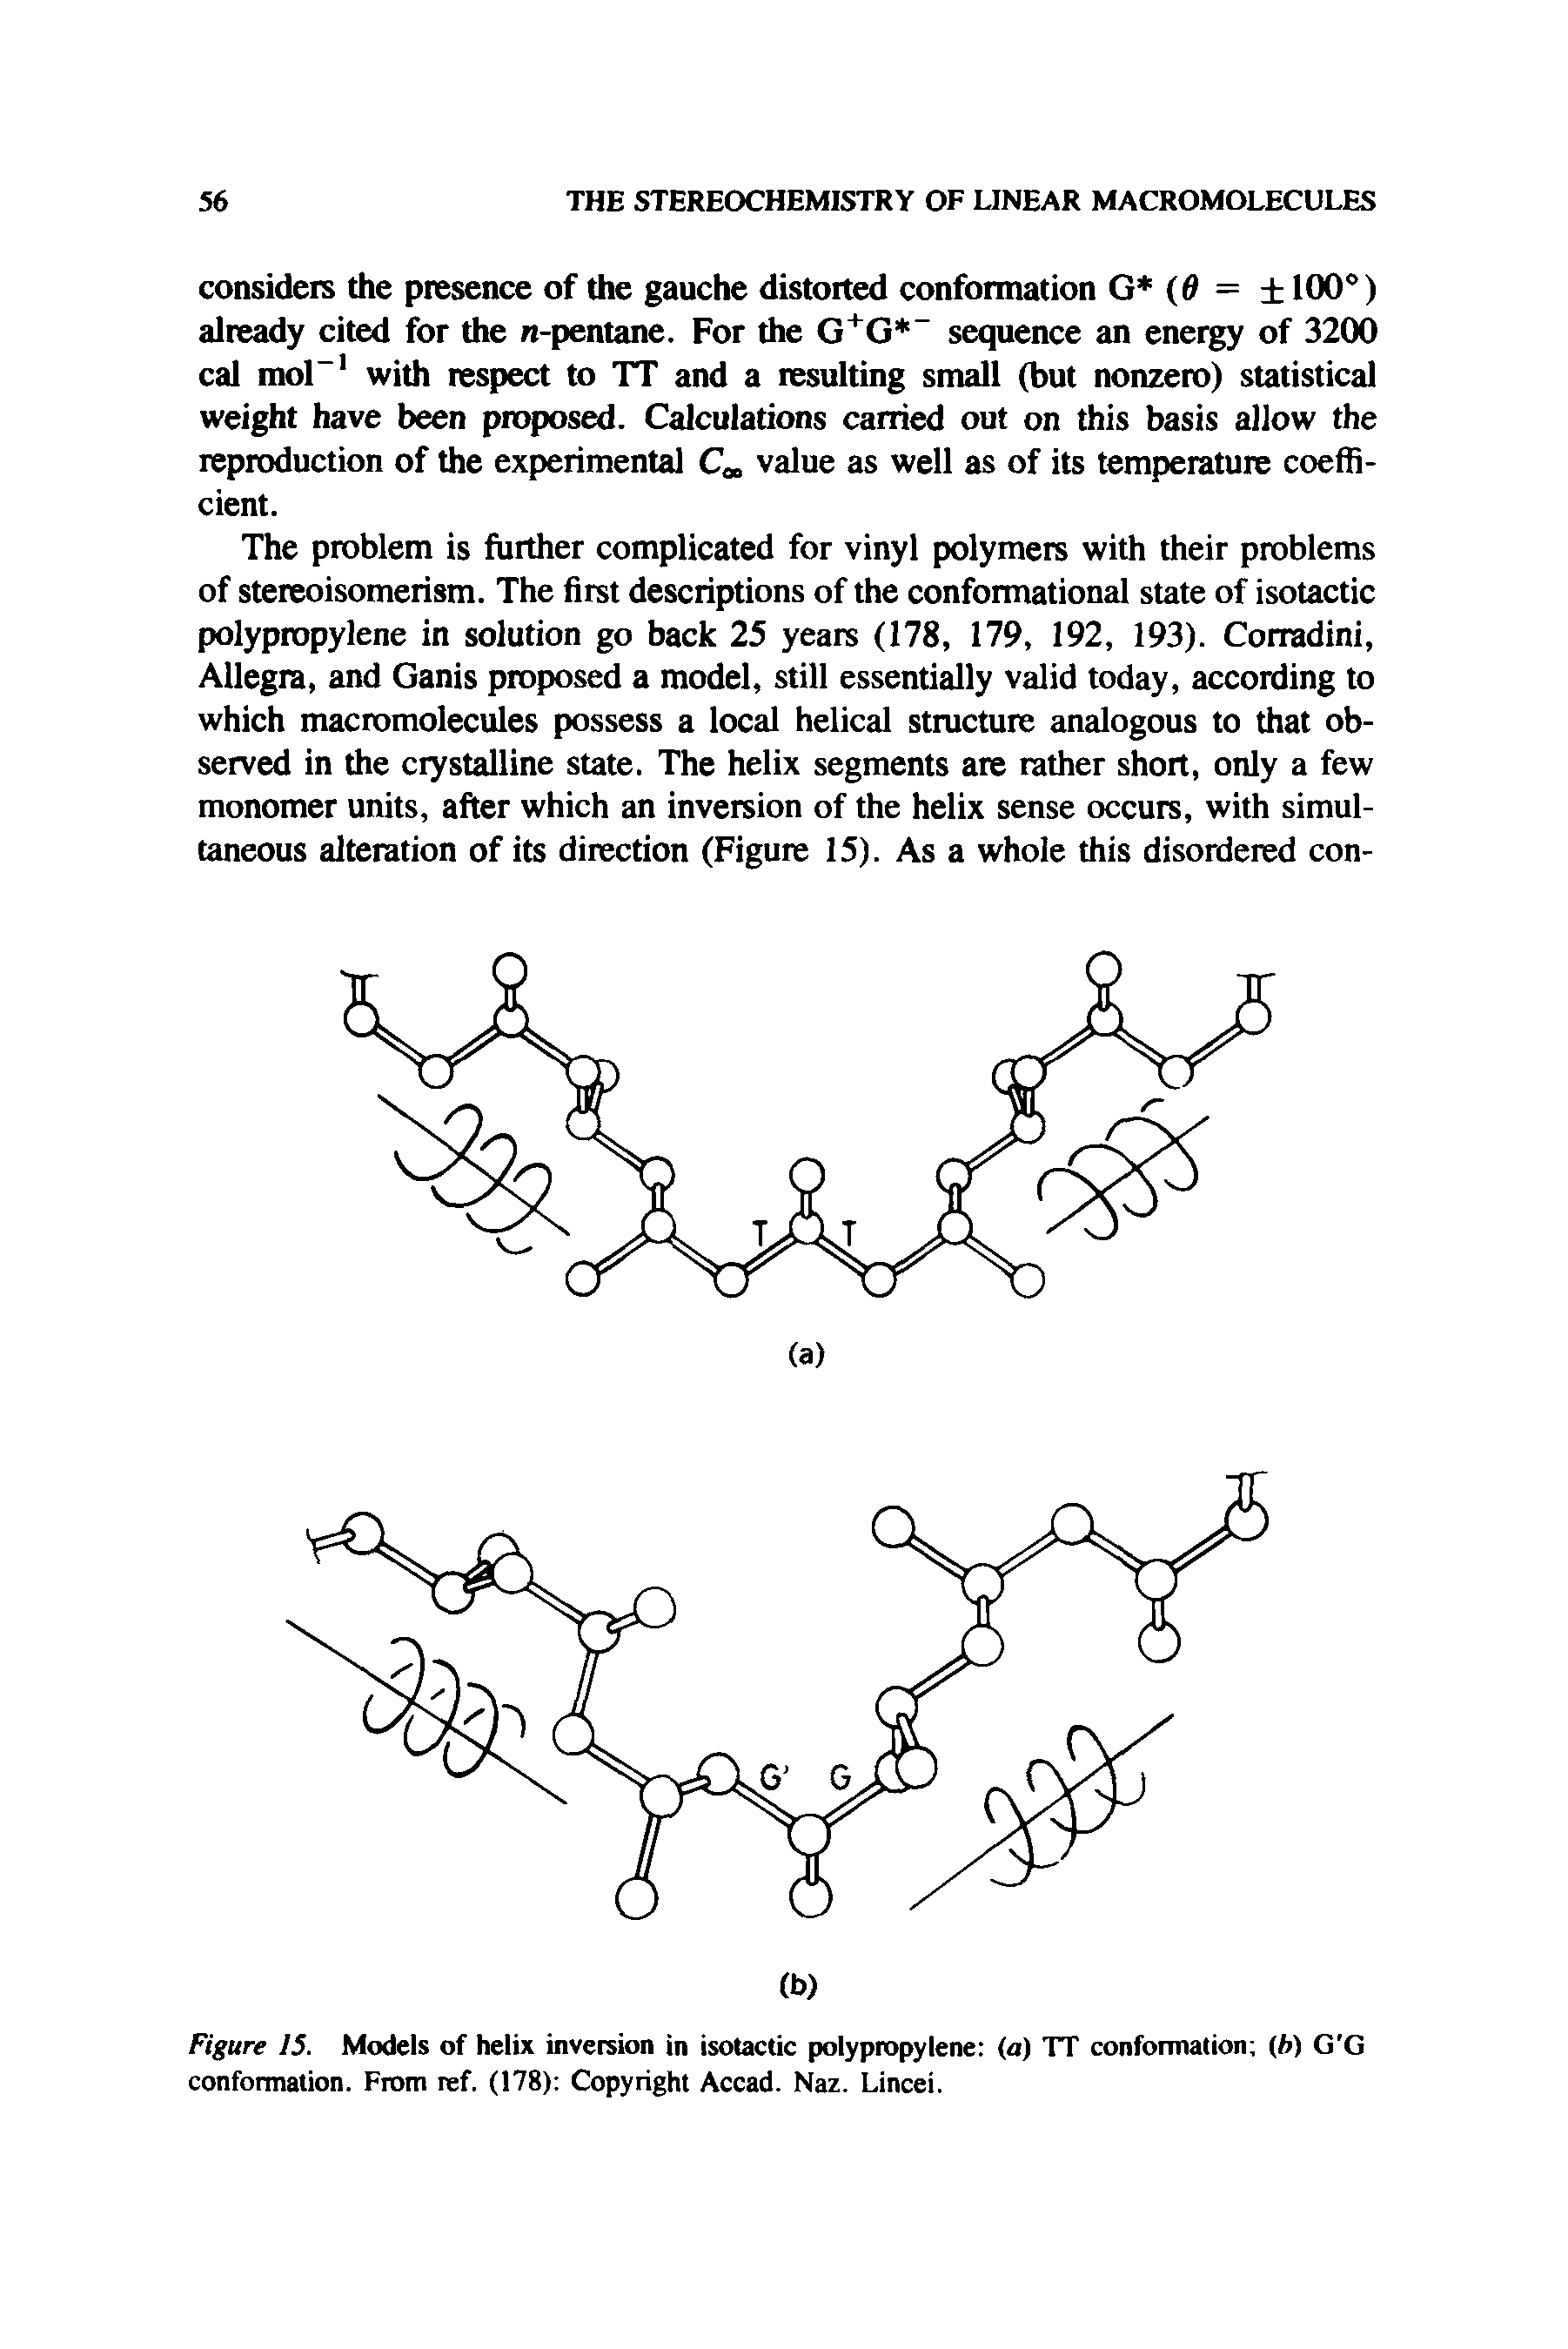 Figure 15. Models of helix inversion in isotactic polypropylene (a) TT conformation (h) G G conformation. From ref. (178) Copyright Accad. Naz. Lincei.